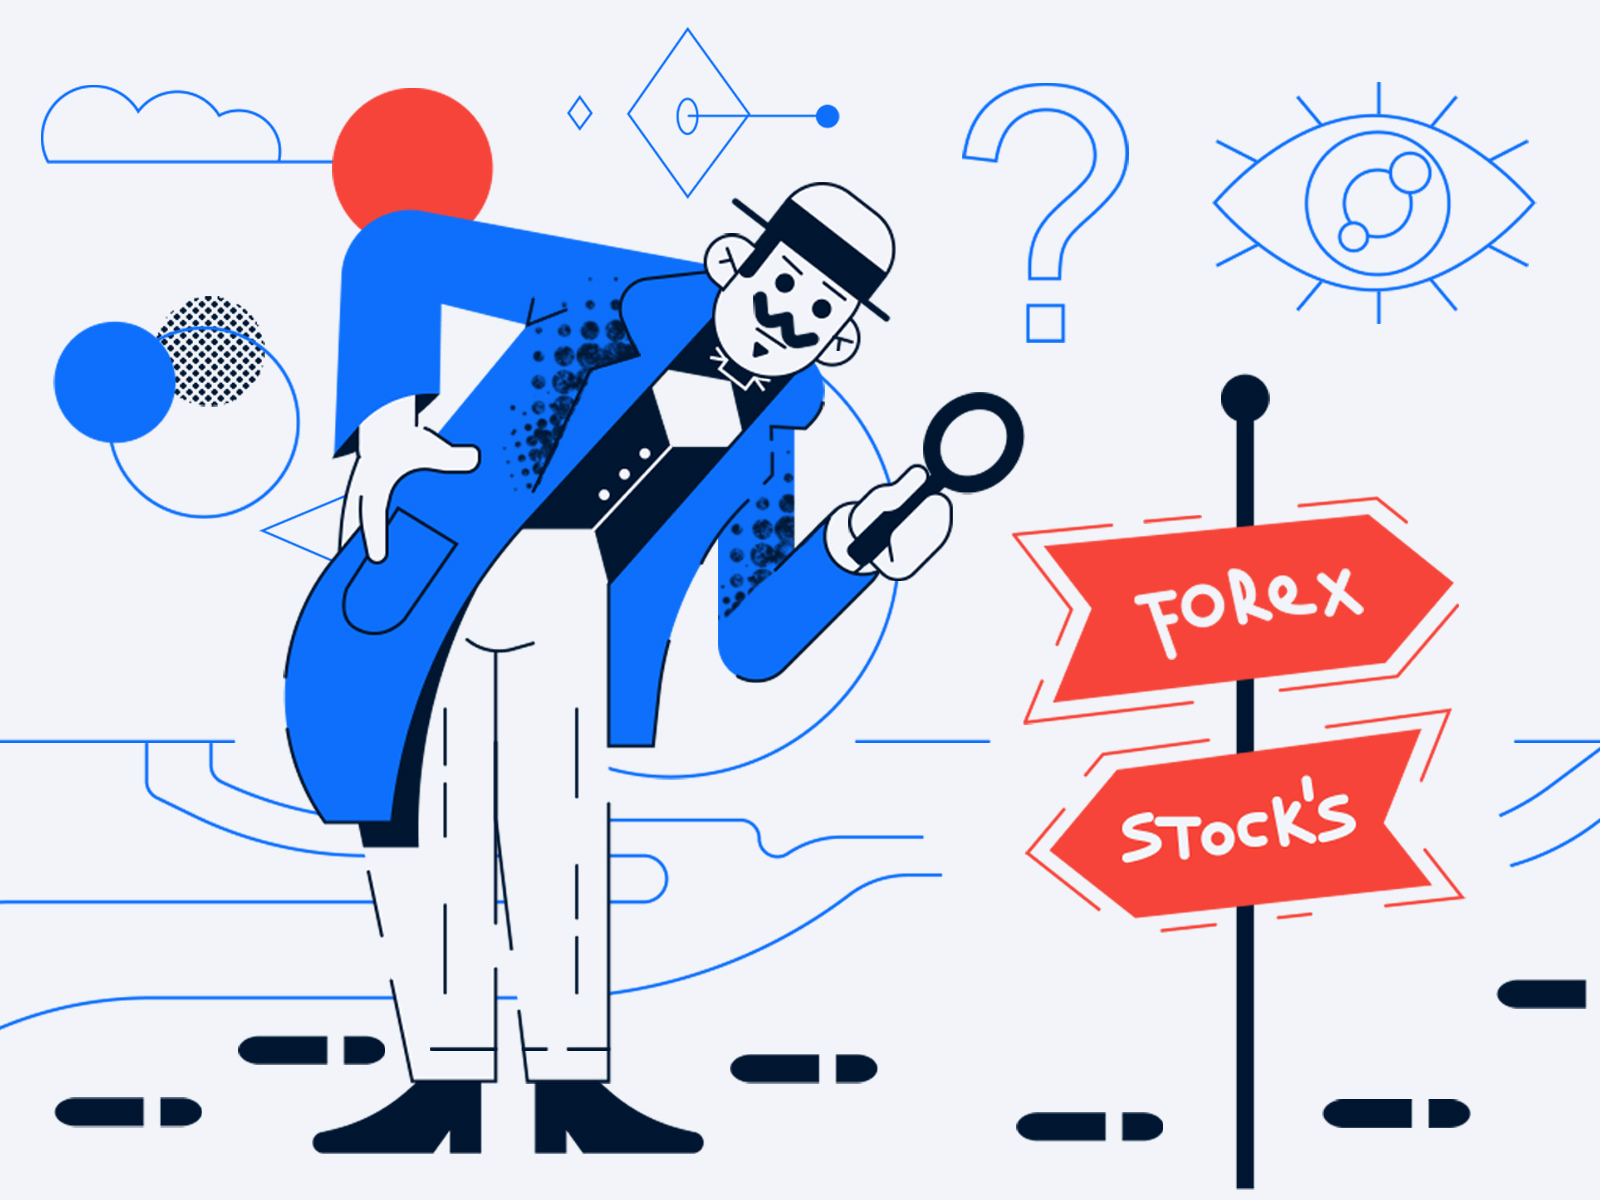 The difference between Forex and stocks lineart illustration vectorart forex trading